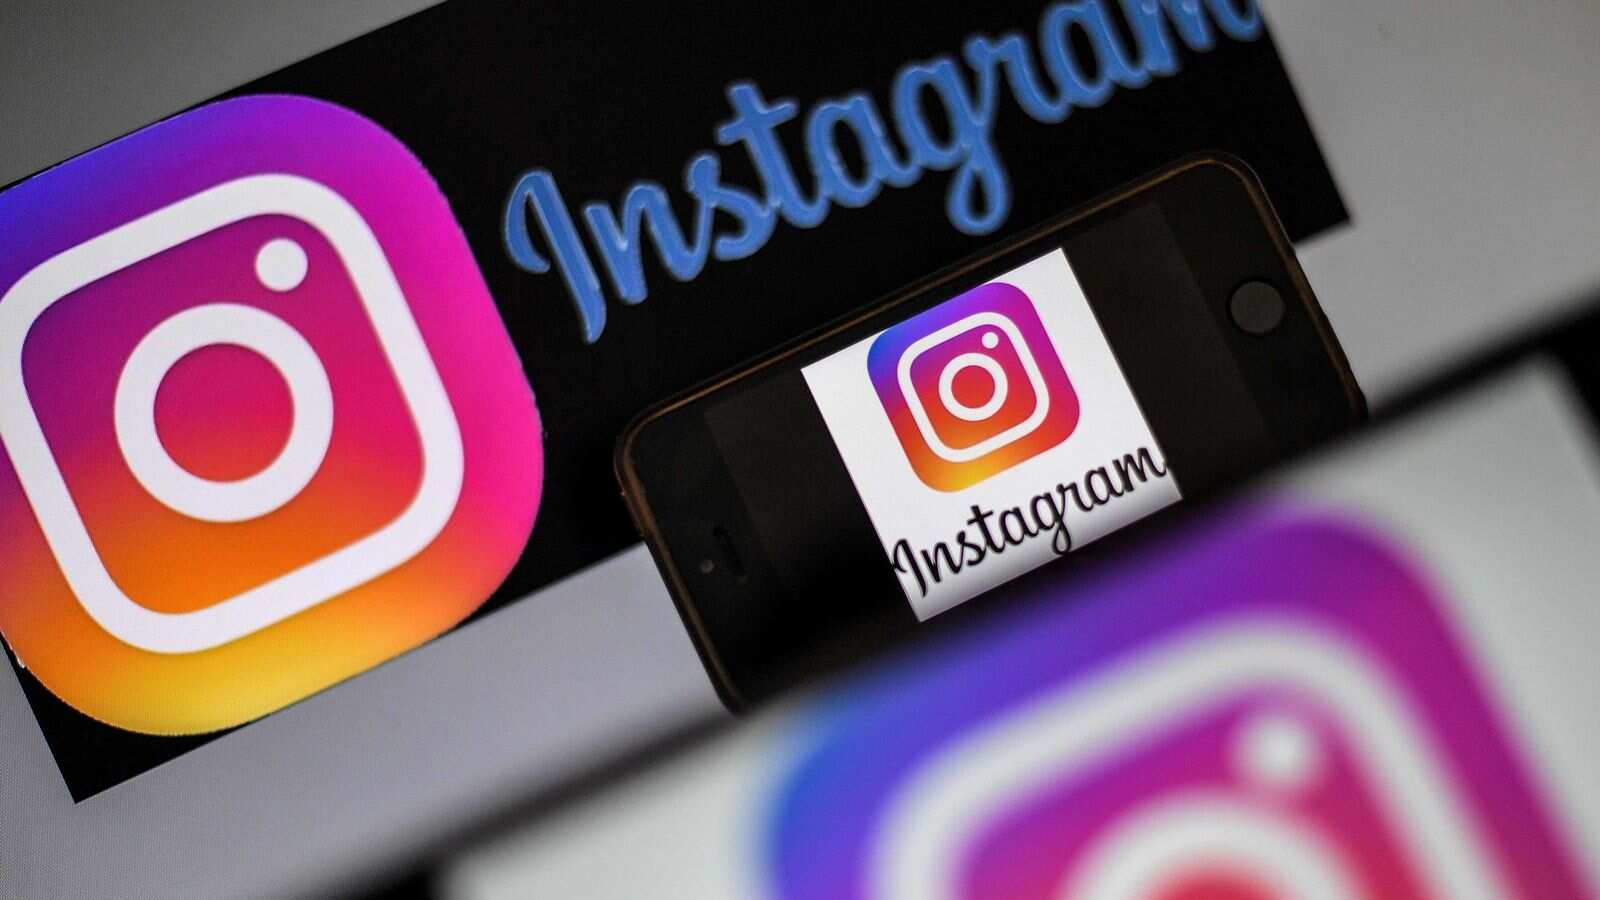 How to Create Engaging Content for More Instagram Views